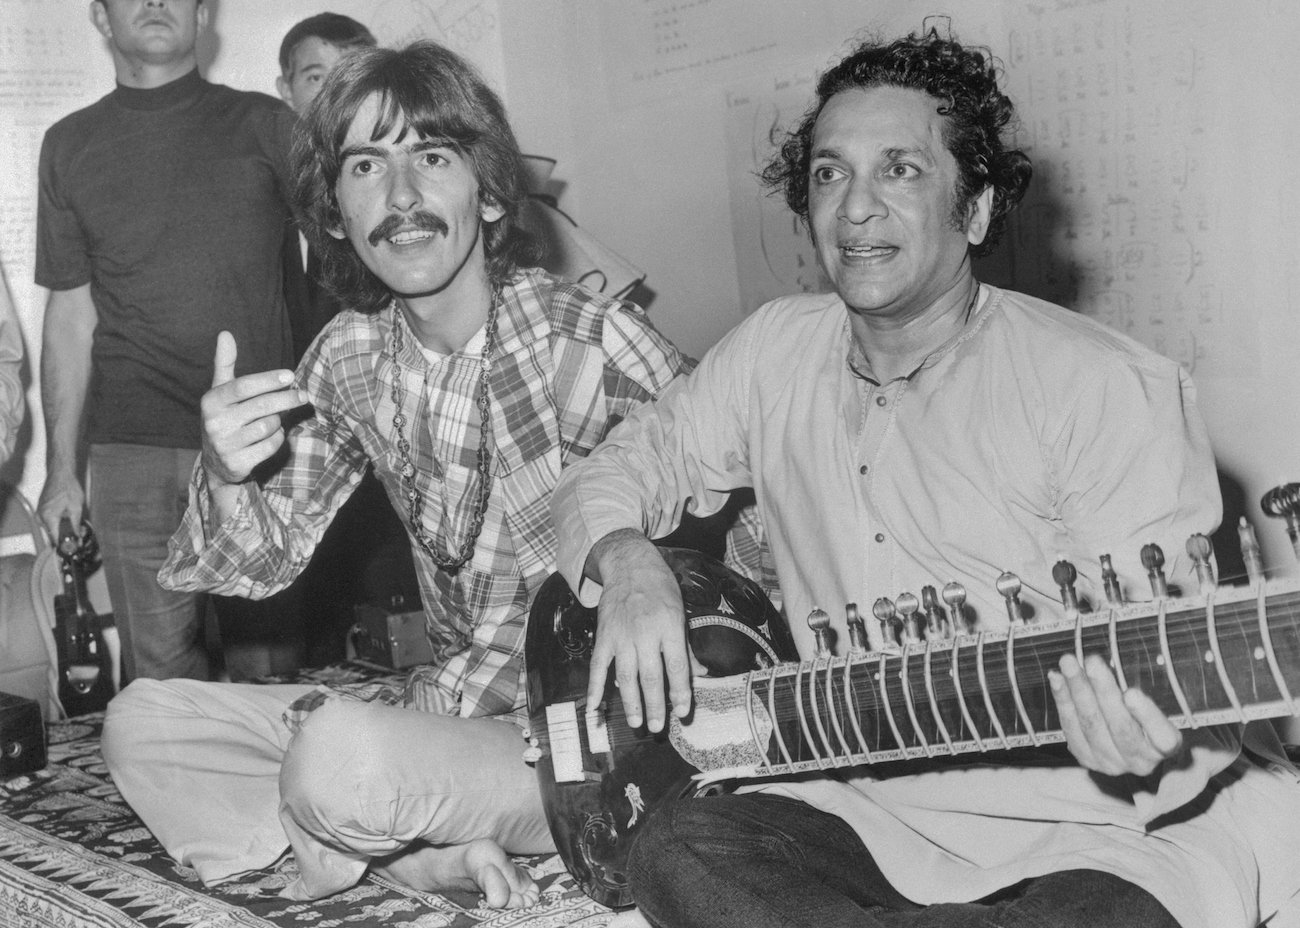 George Harrison and Ravi Shankar playing Indian music together on the floor in 1967.